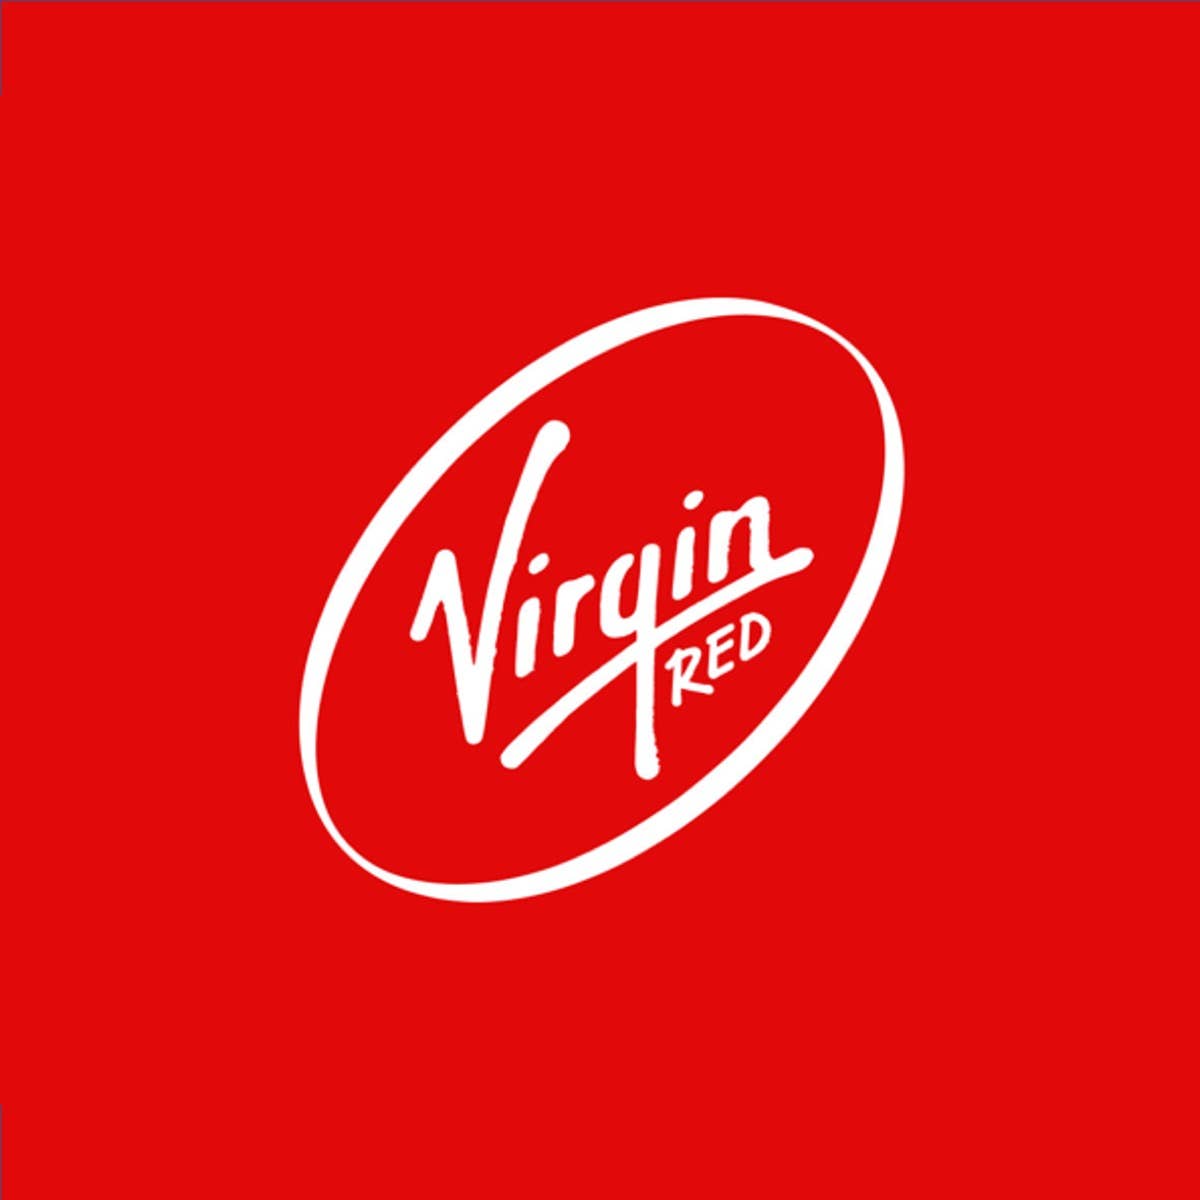 Virgin Red appoints Carat for global media planning and buying 